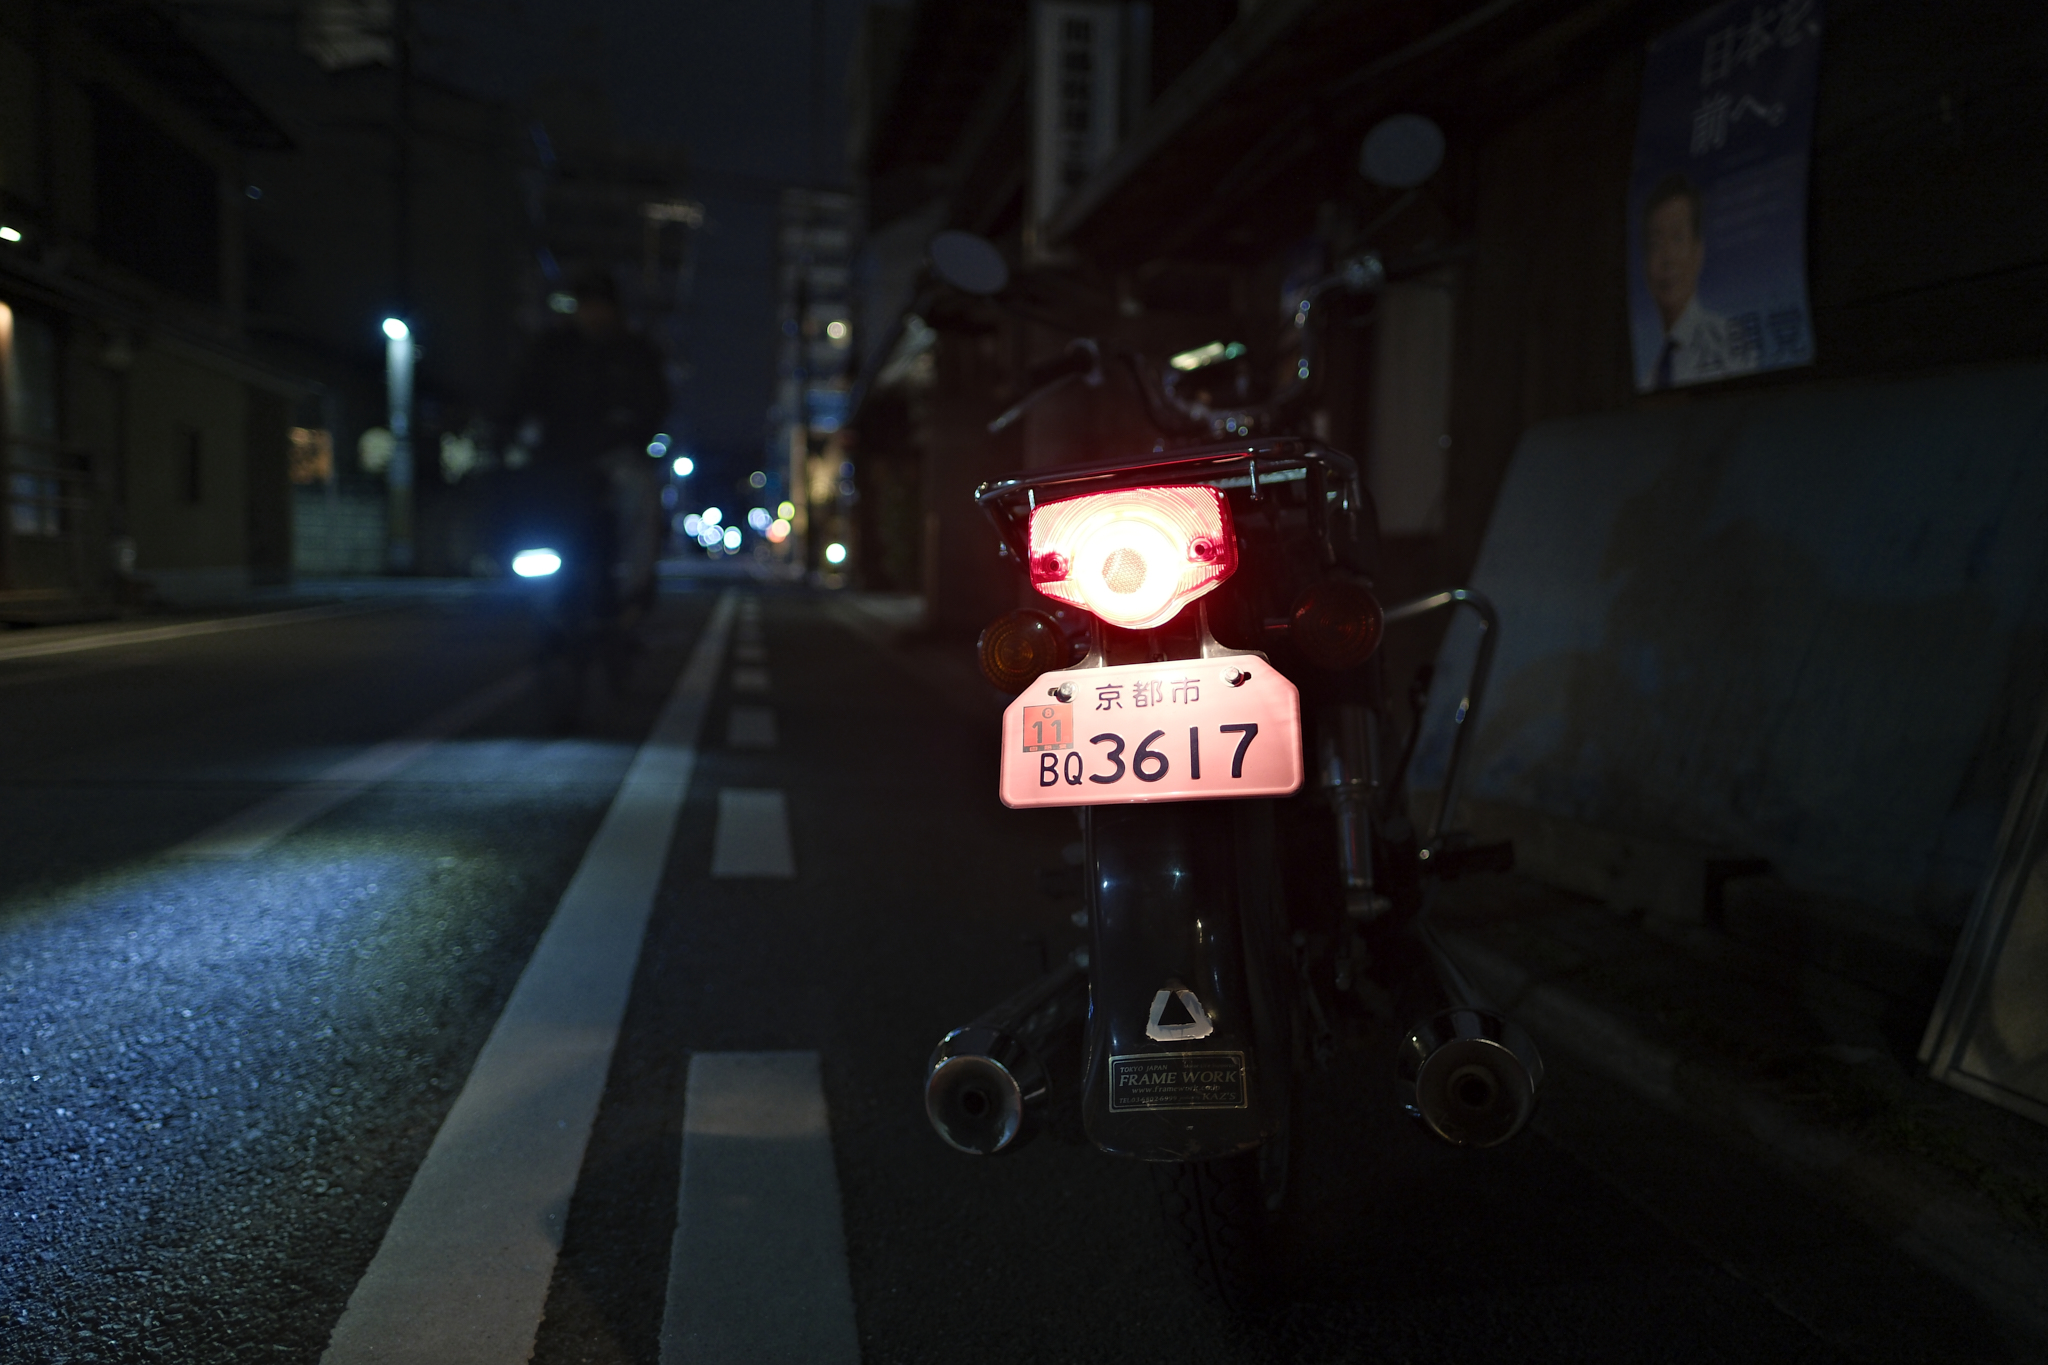 Unattended moped